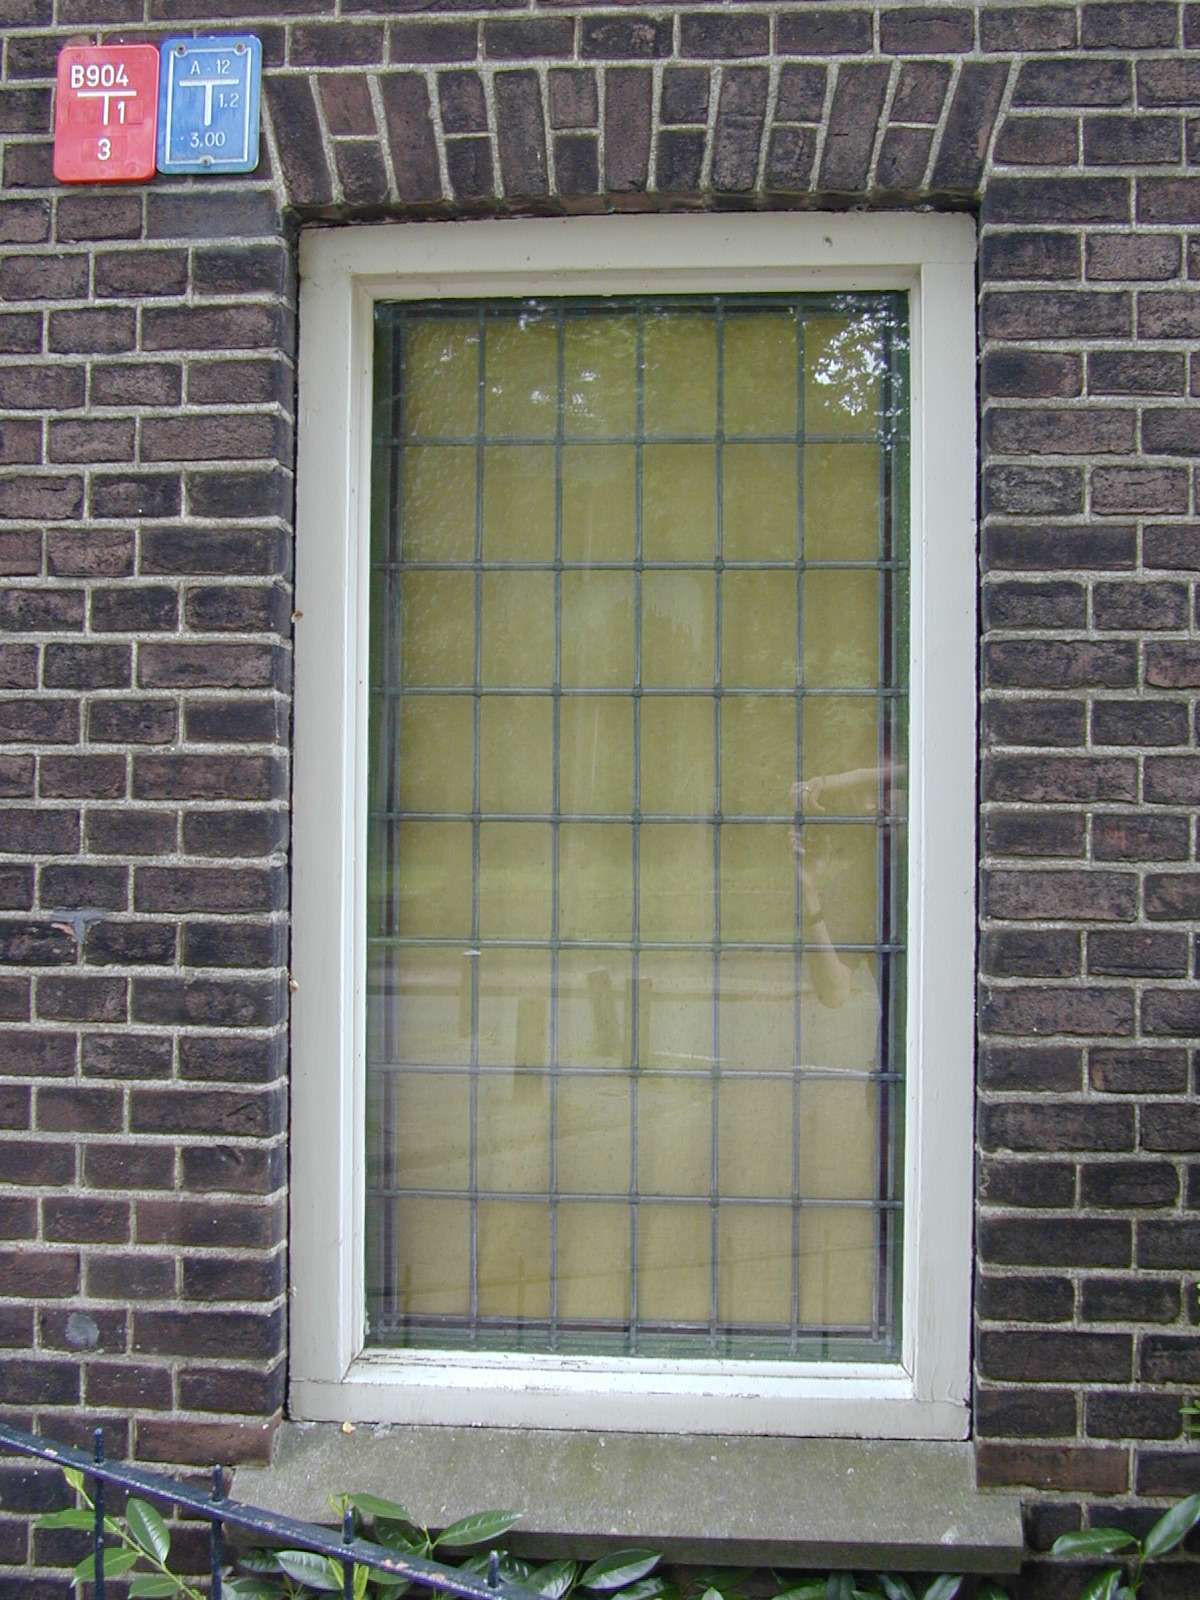 window bar bars wire wires wired square glass bricks boarded up